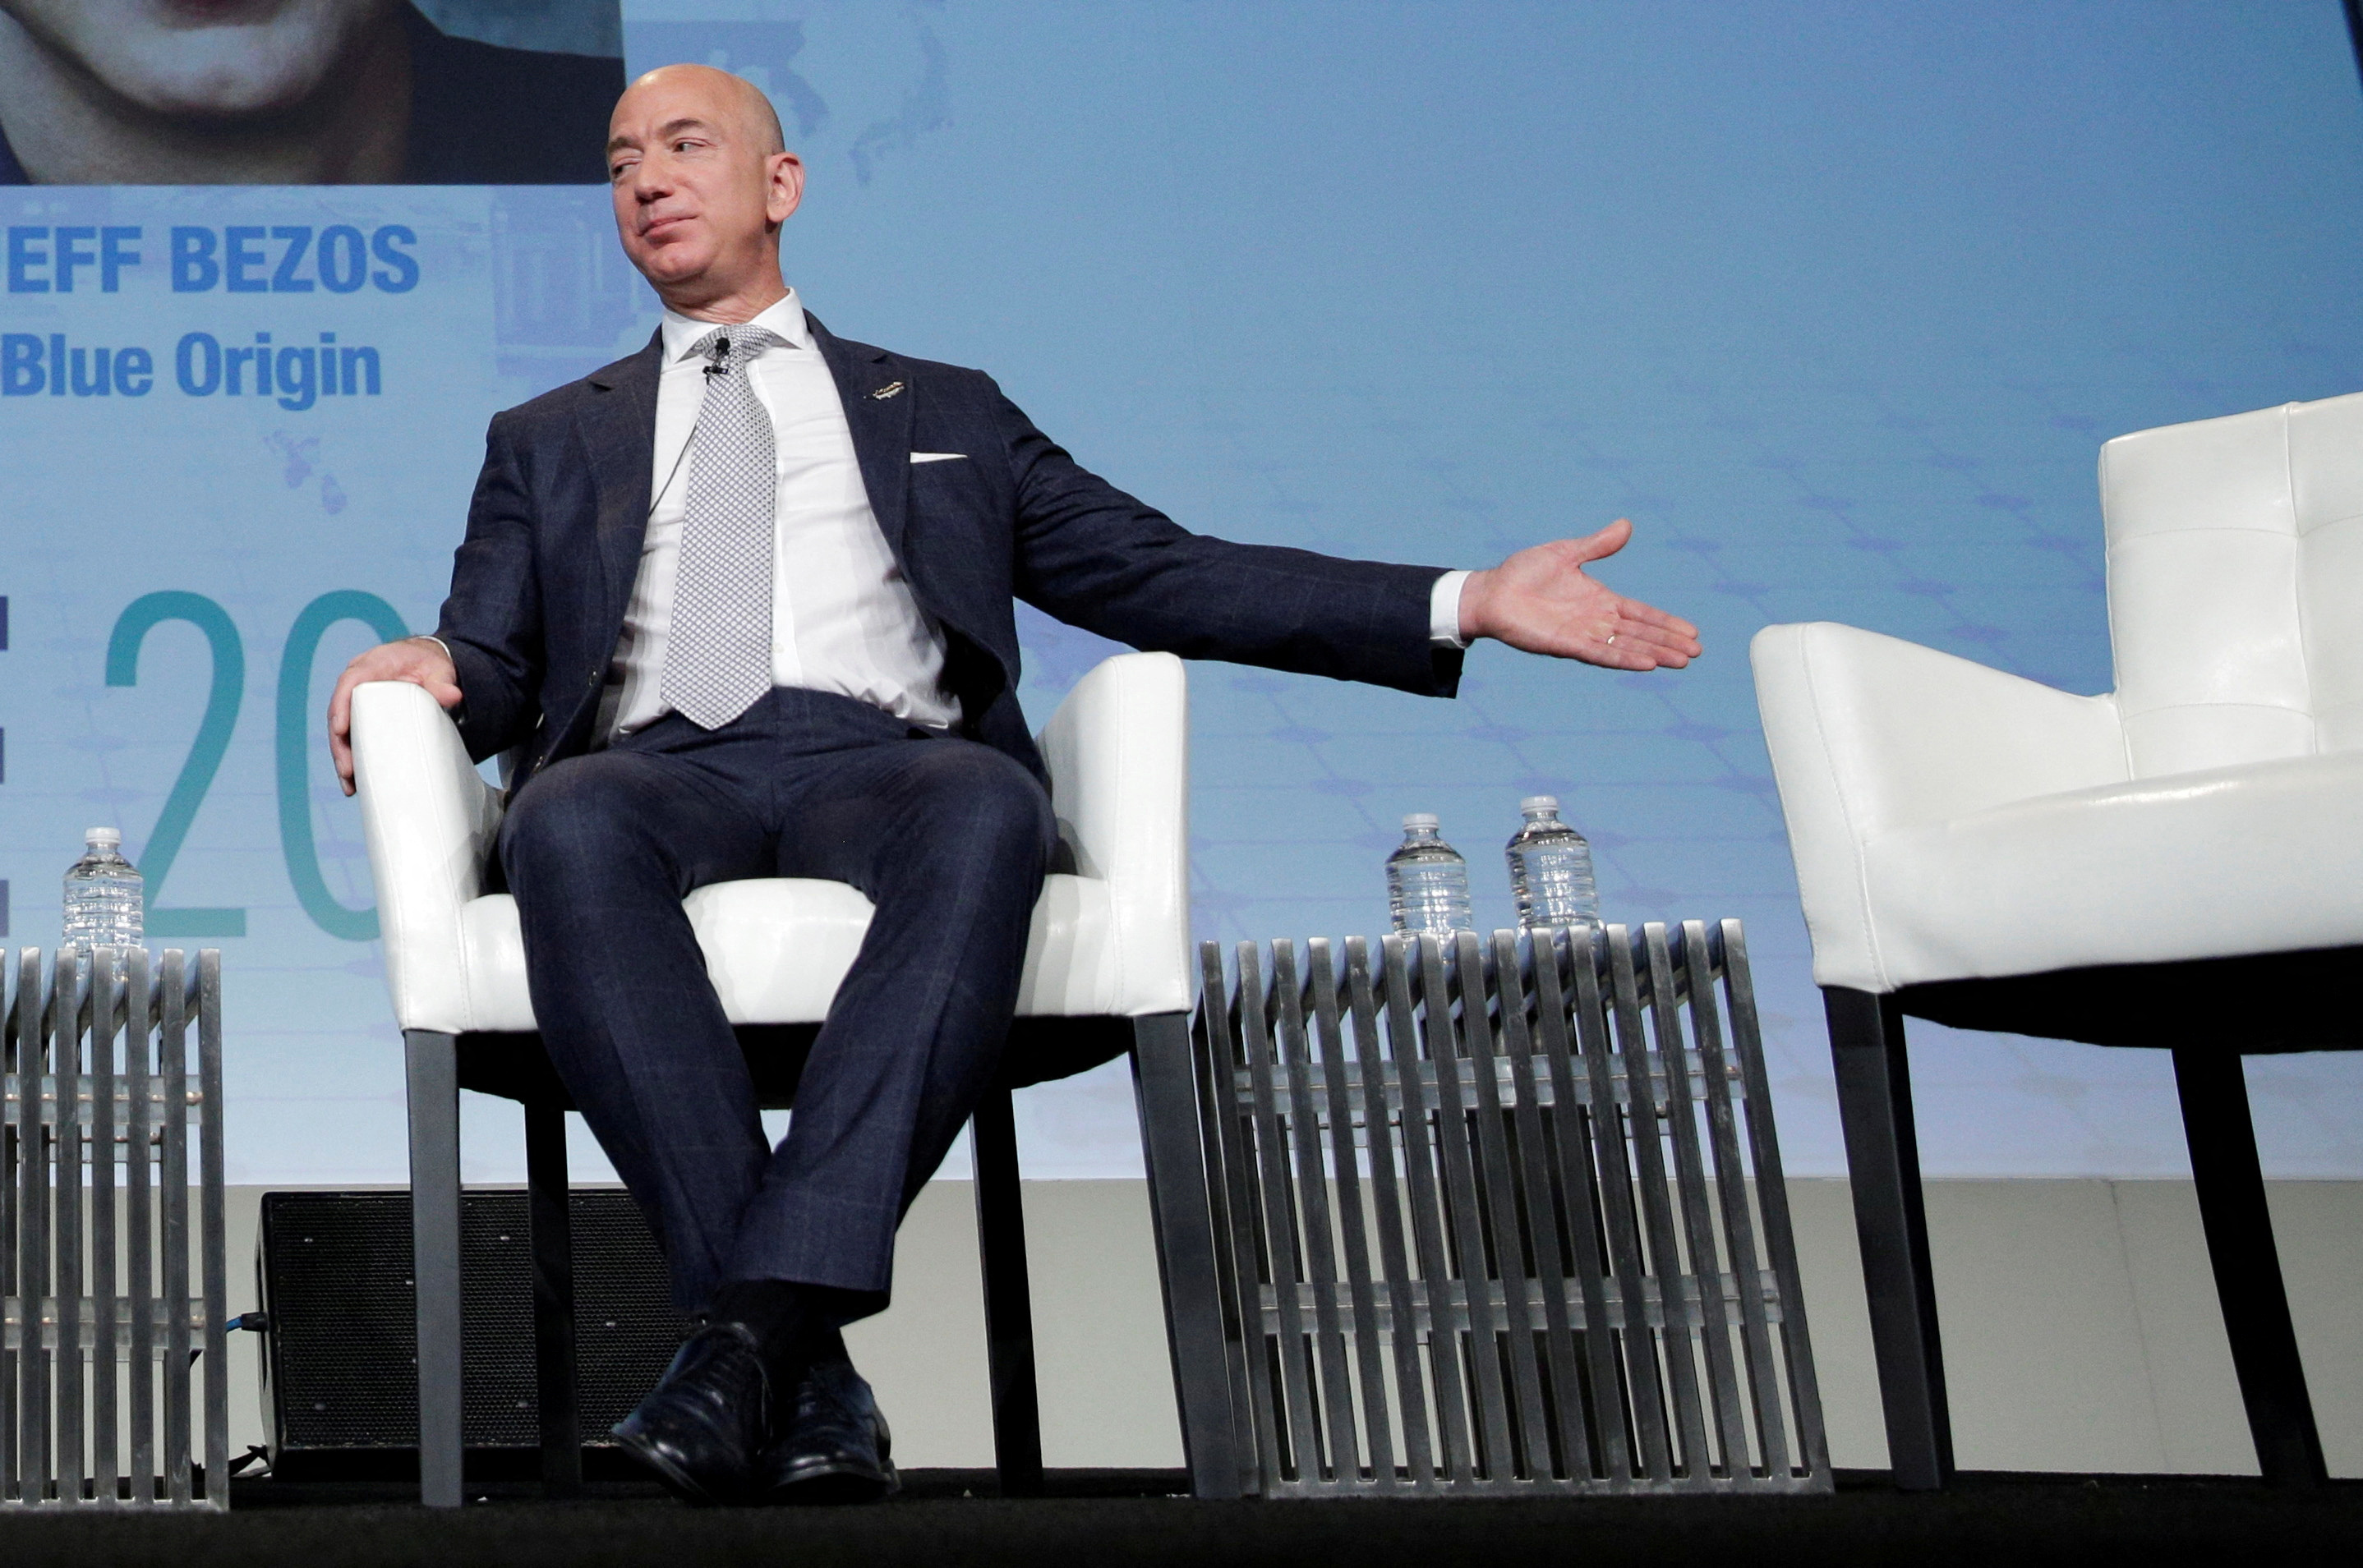 Jeff Bezos, founder of Blue Origin and CEO of Amazon, speaks about the future plans of Blue Origin in Washington